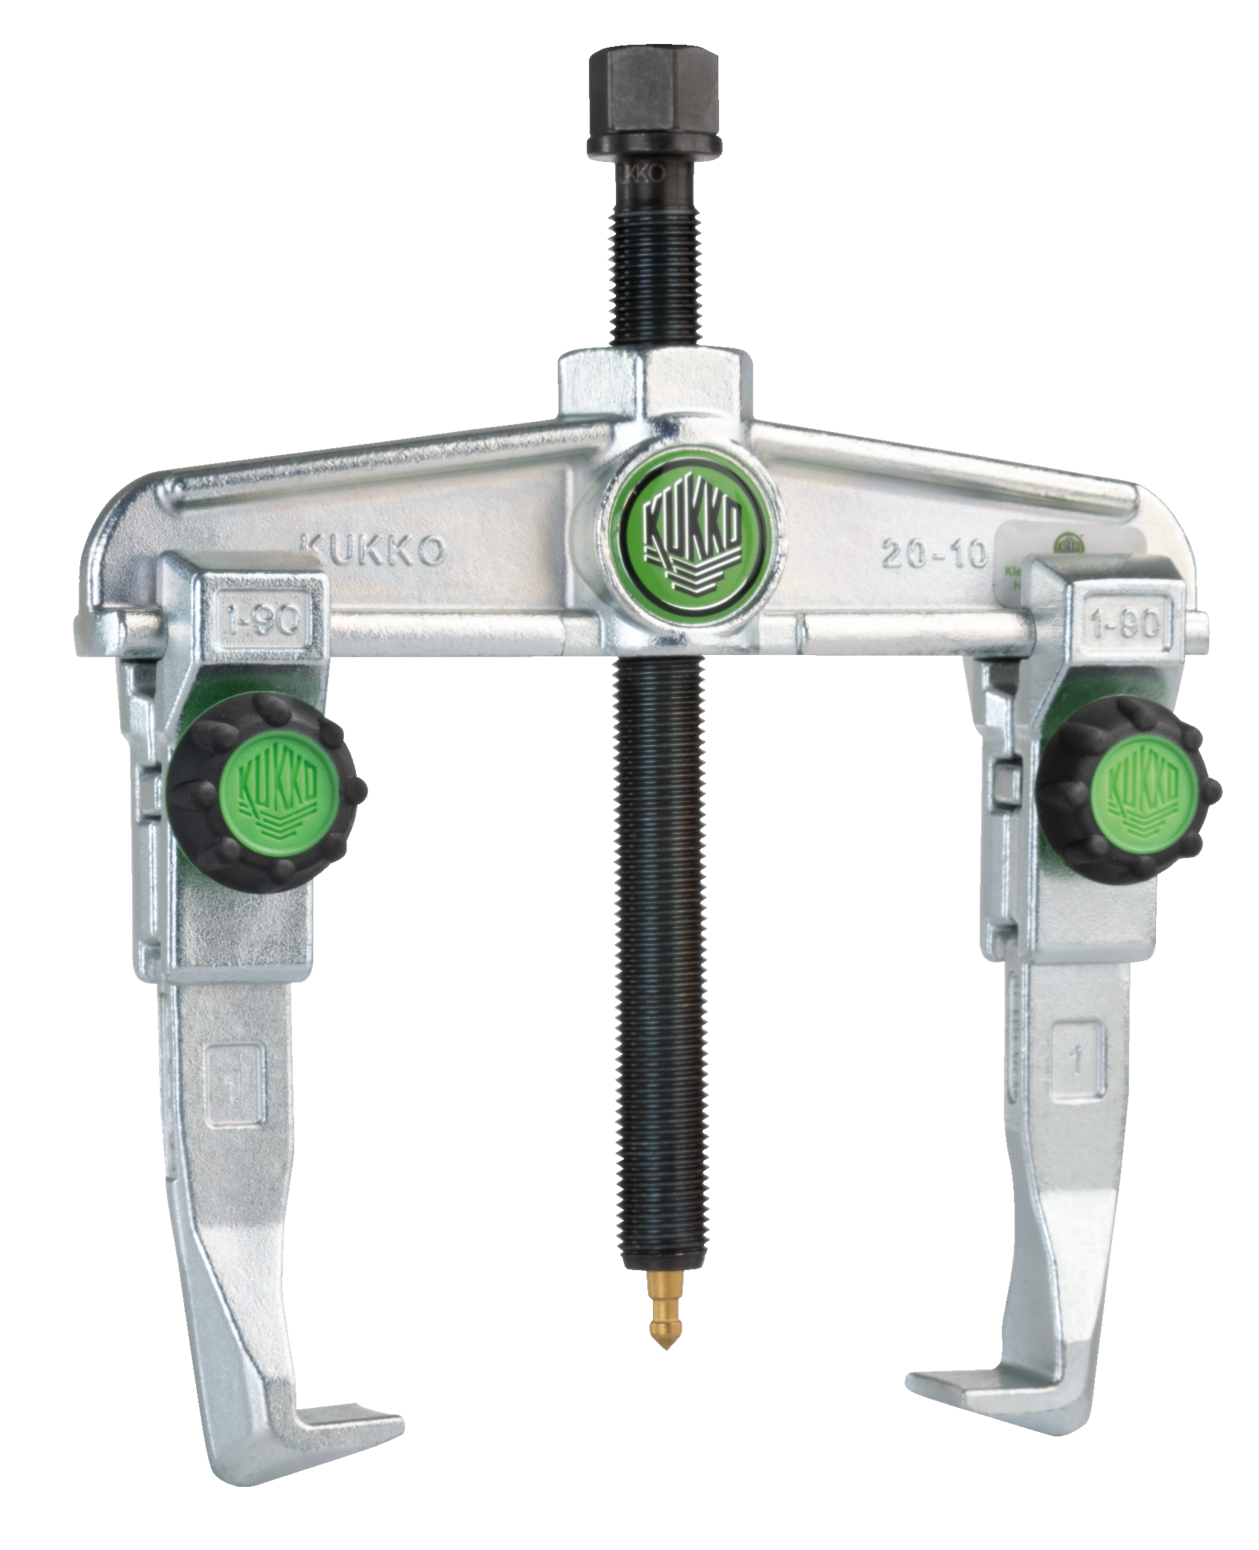 The 2-arm universal puller 20-AV with adjustable clamping depth for pulling off bearings, gears and washers